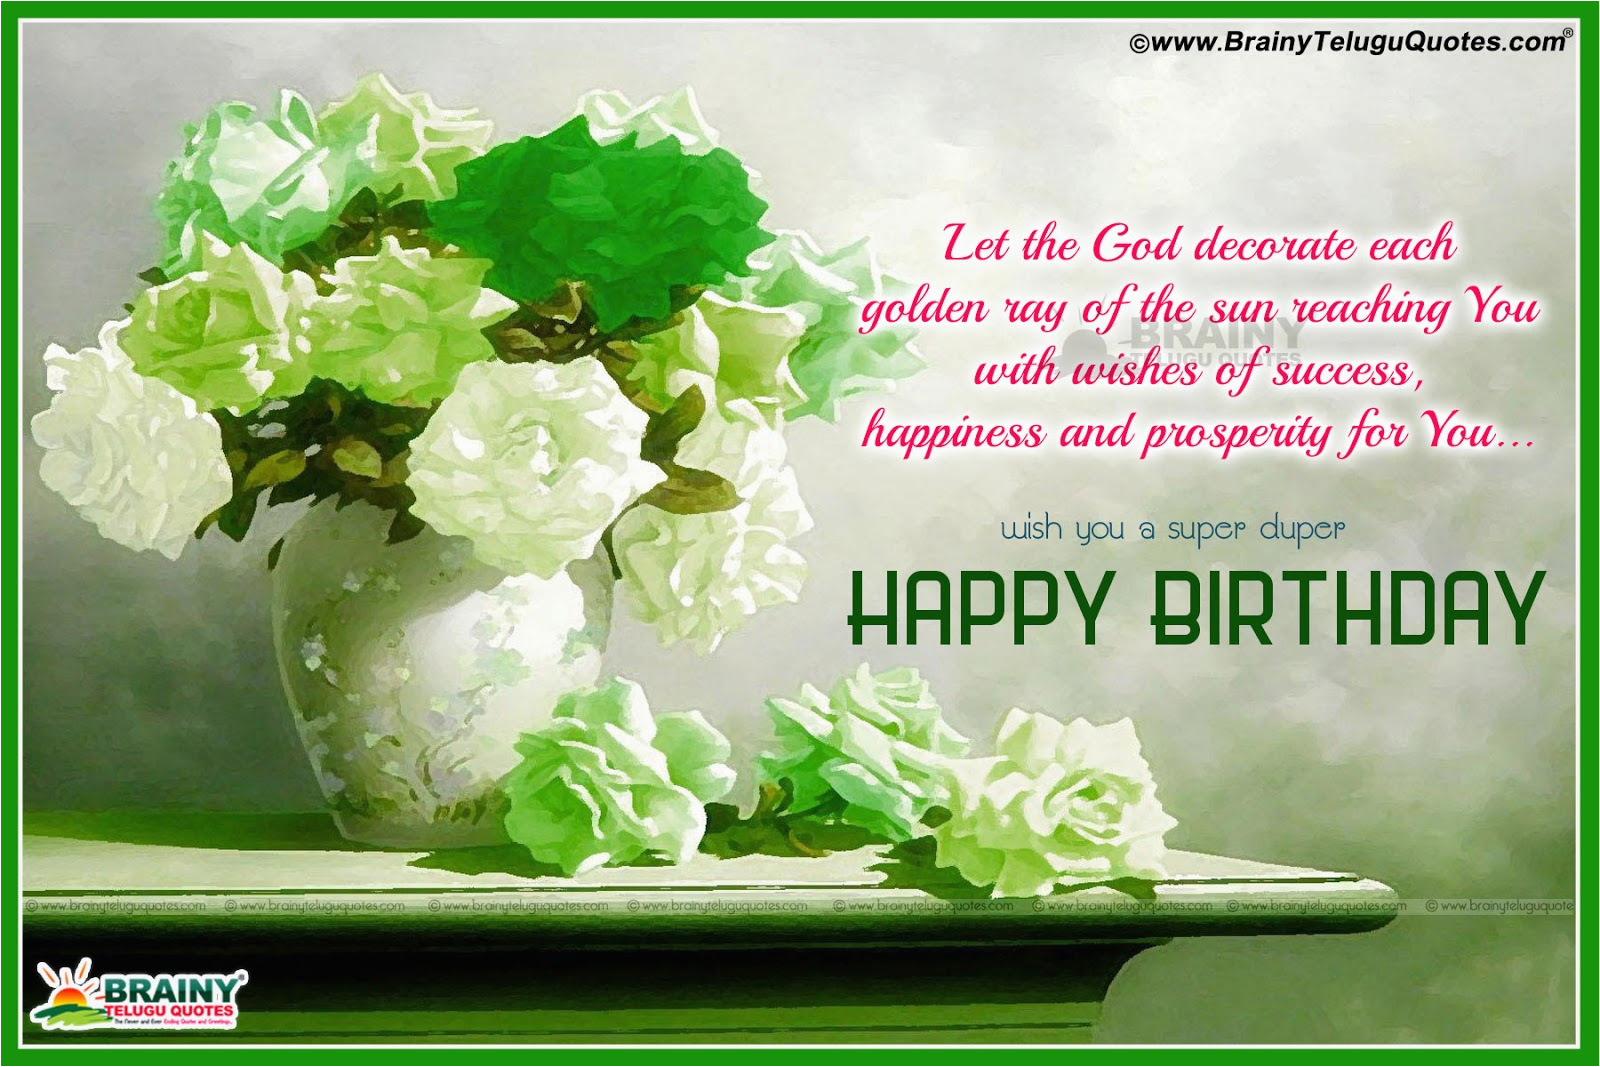 Happy Birthday Brainy Quotes Best Friend Birthday Quotes and Wishes Gifts Greetings In